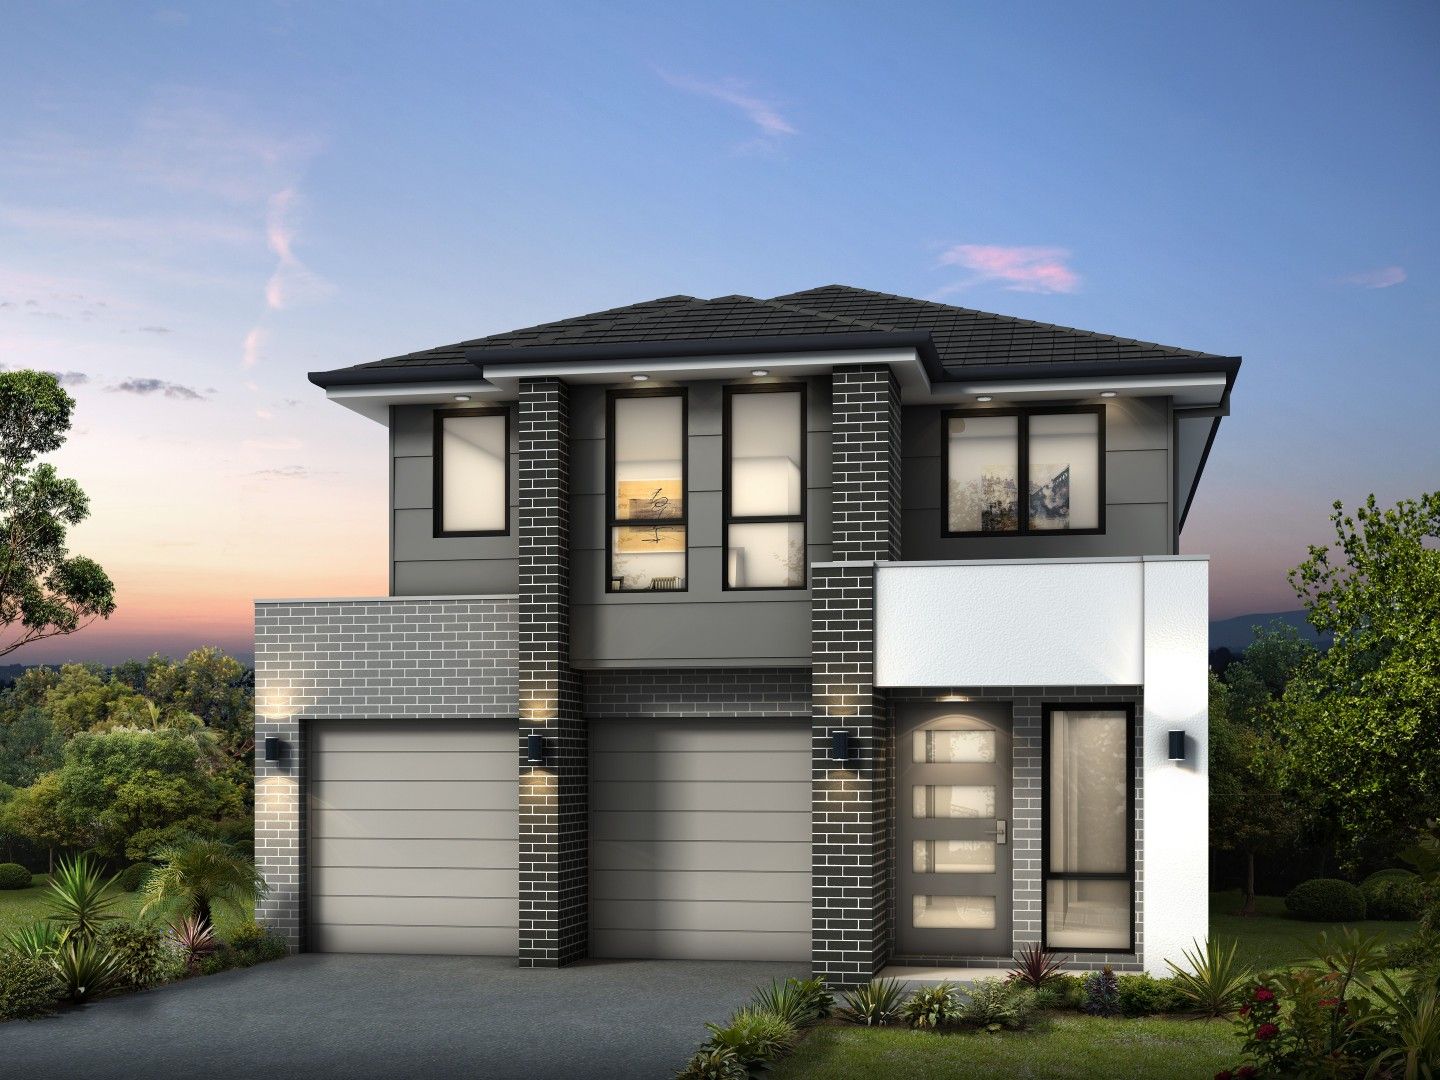 5 bedrooms New House & Land in Lot 2033 Giovanni Street ORAN PARK NSW, 2570